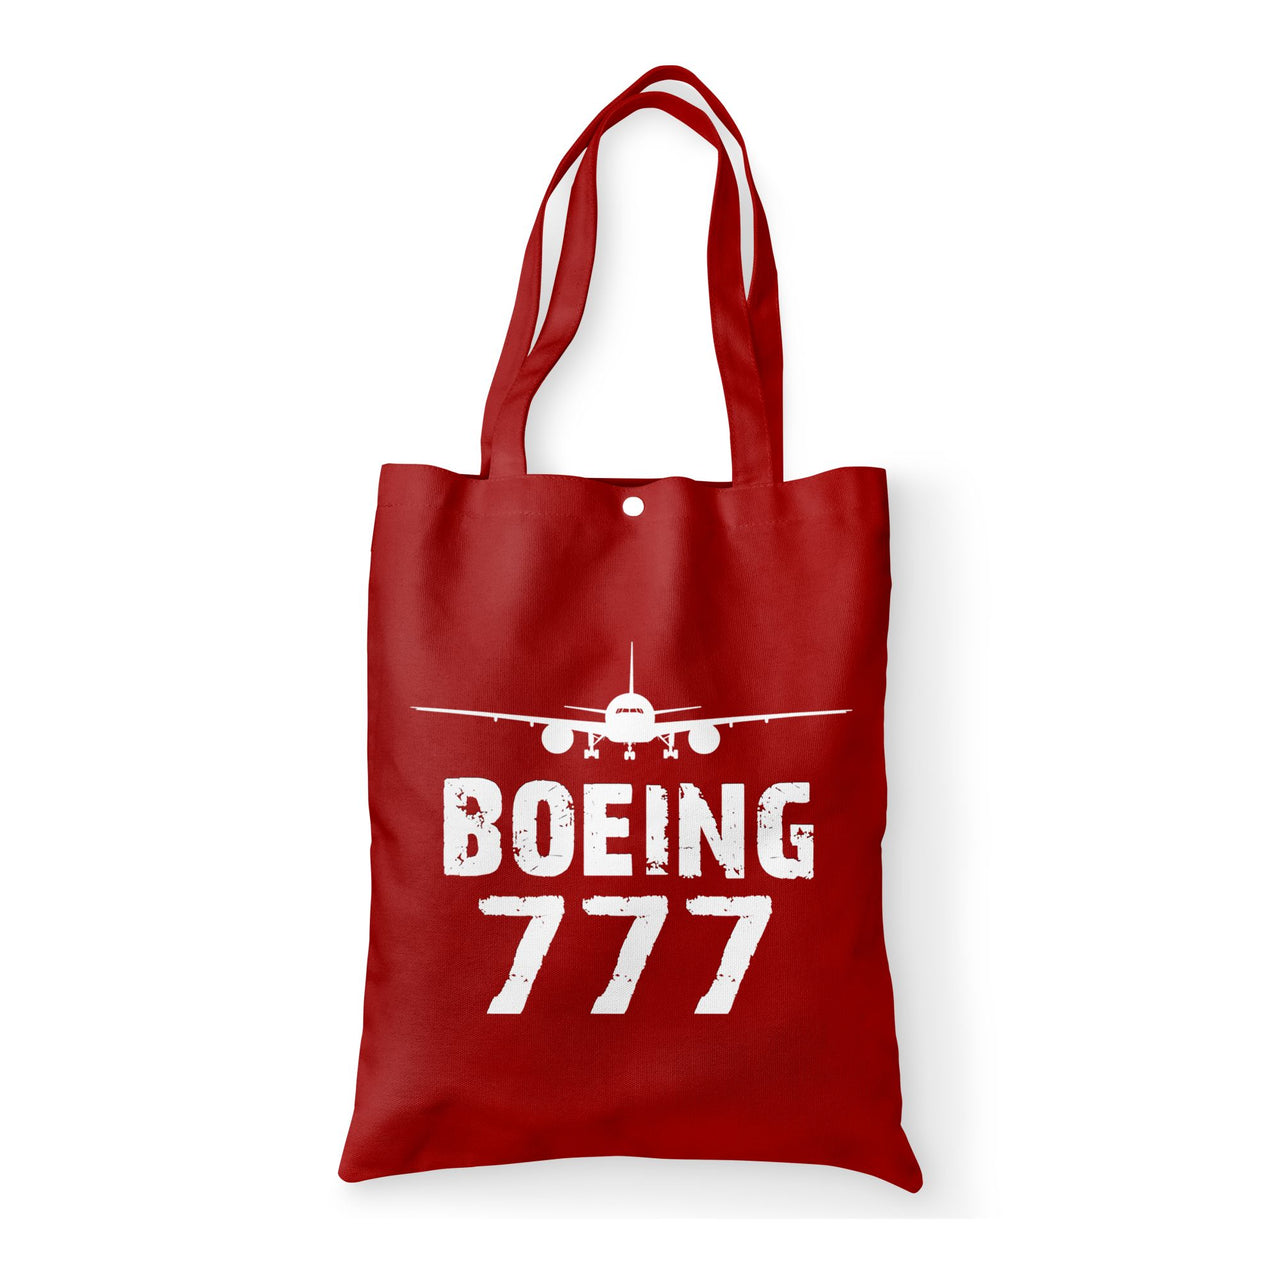 Boeing 777 & Plane Designed Tote Bags